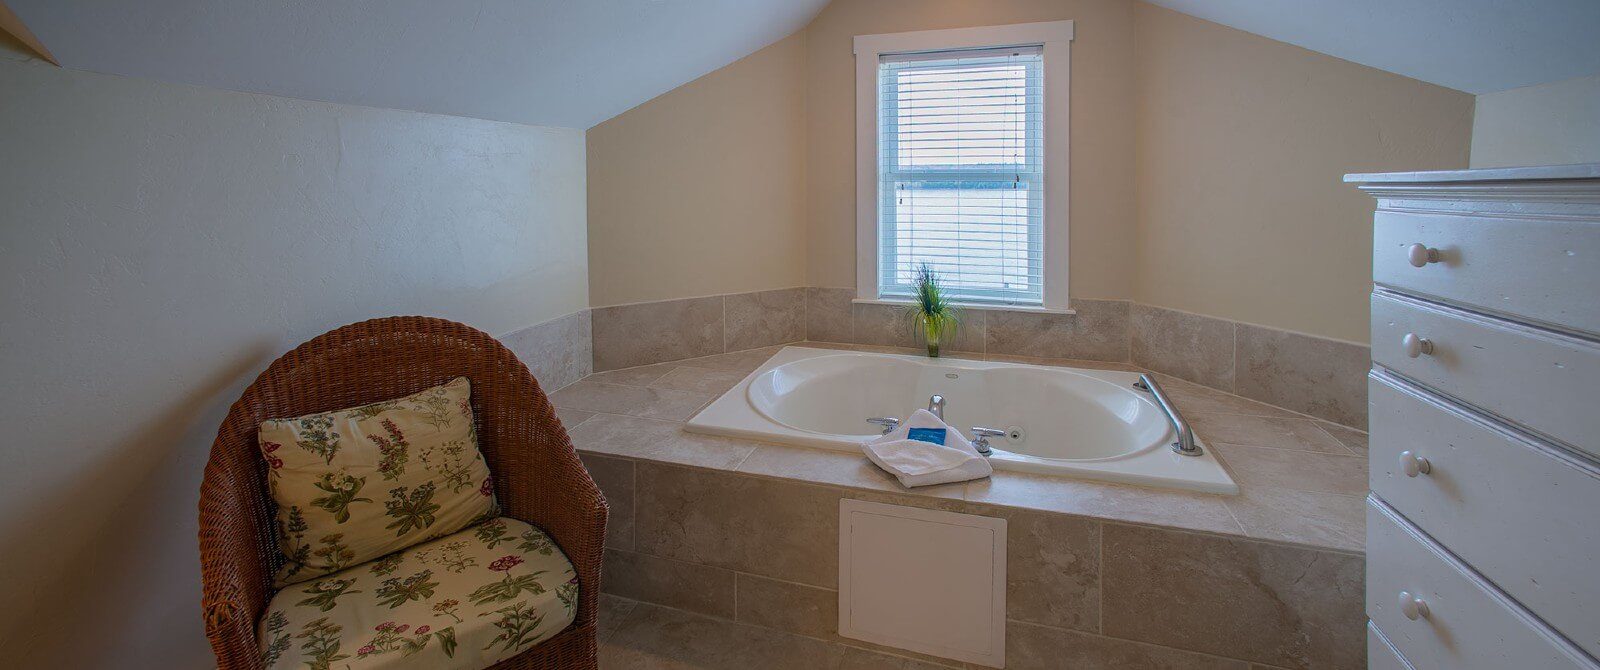 Large jacuzzi tub surrounded by tile under a window with blinds